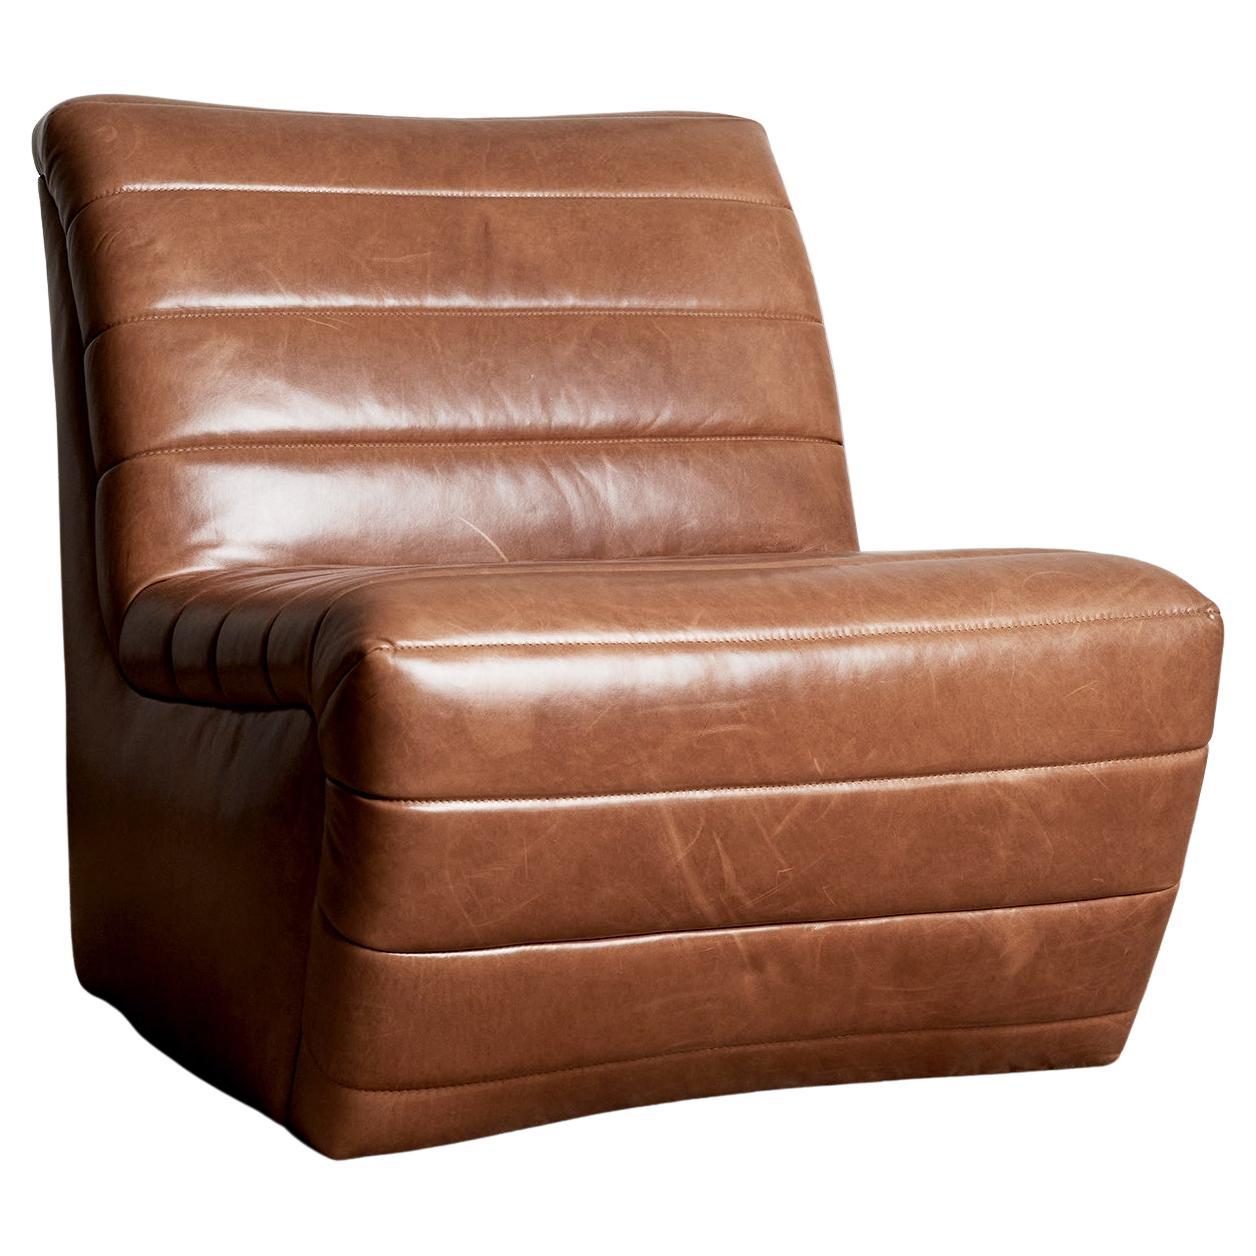 Brunoy Leather Armless Chair by Christiane Lemieux For Sale